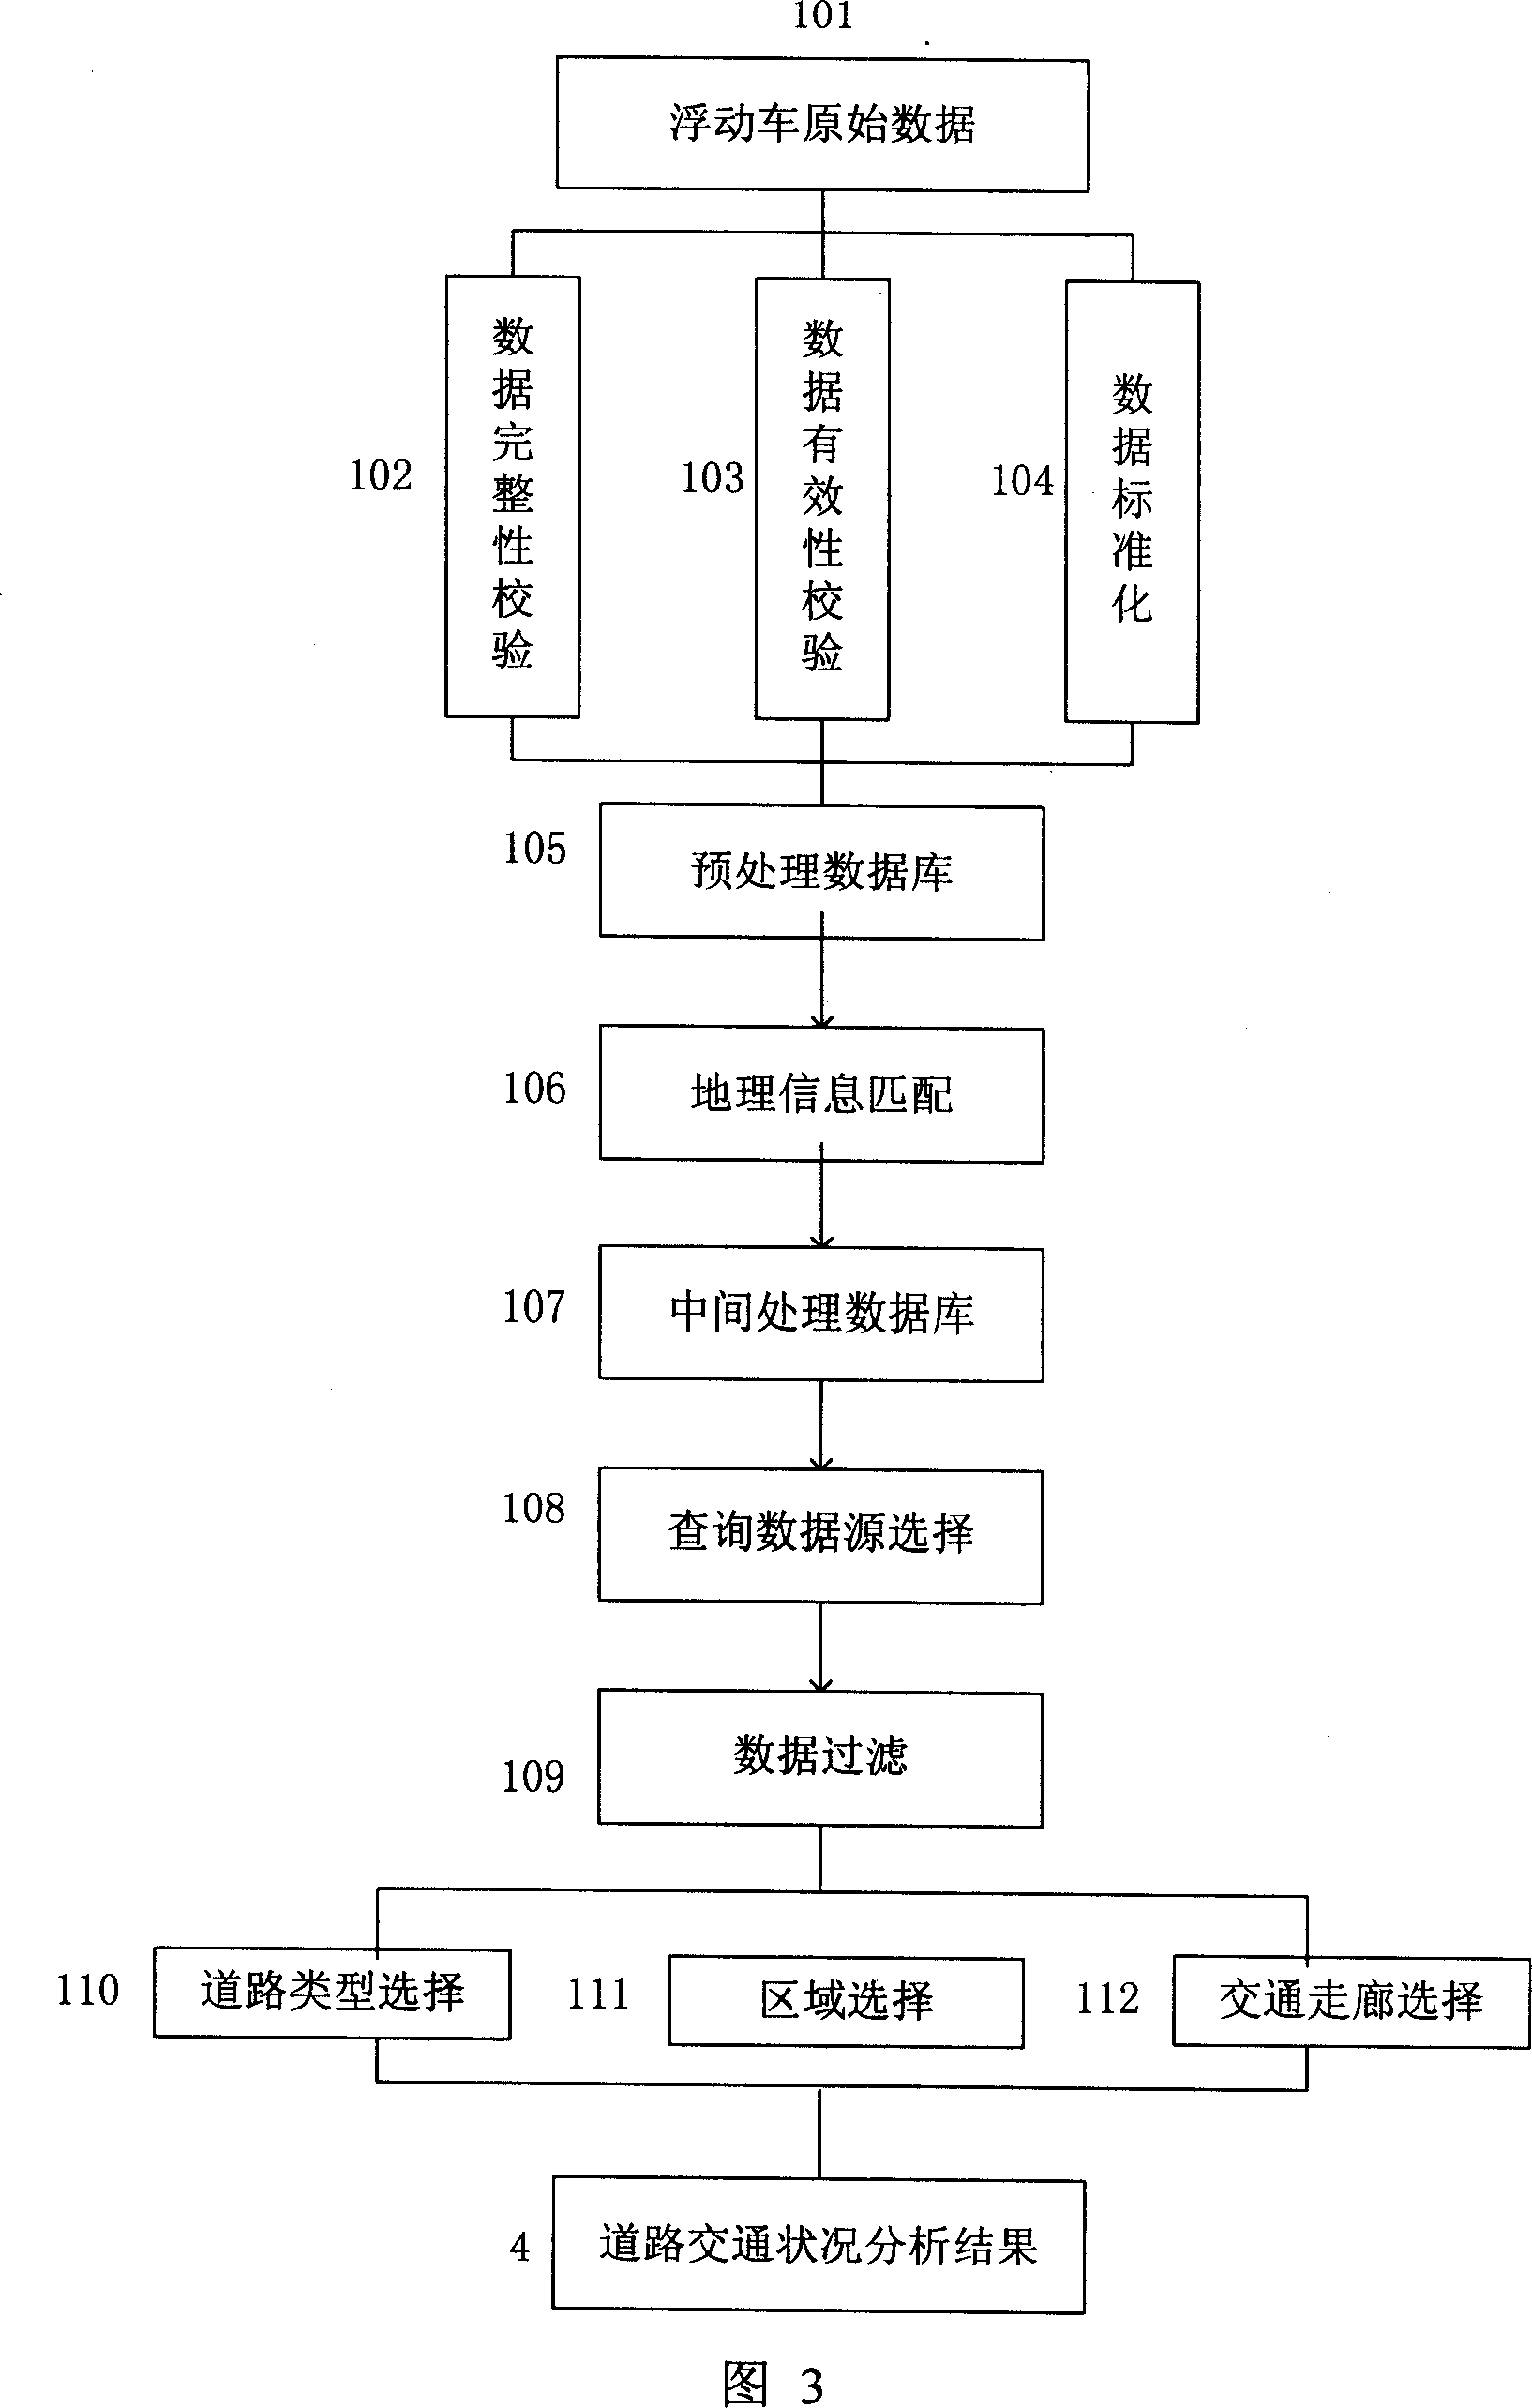 Traffic analysis method based on fluctuated data of vehicles